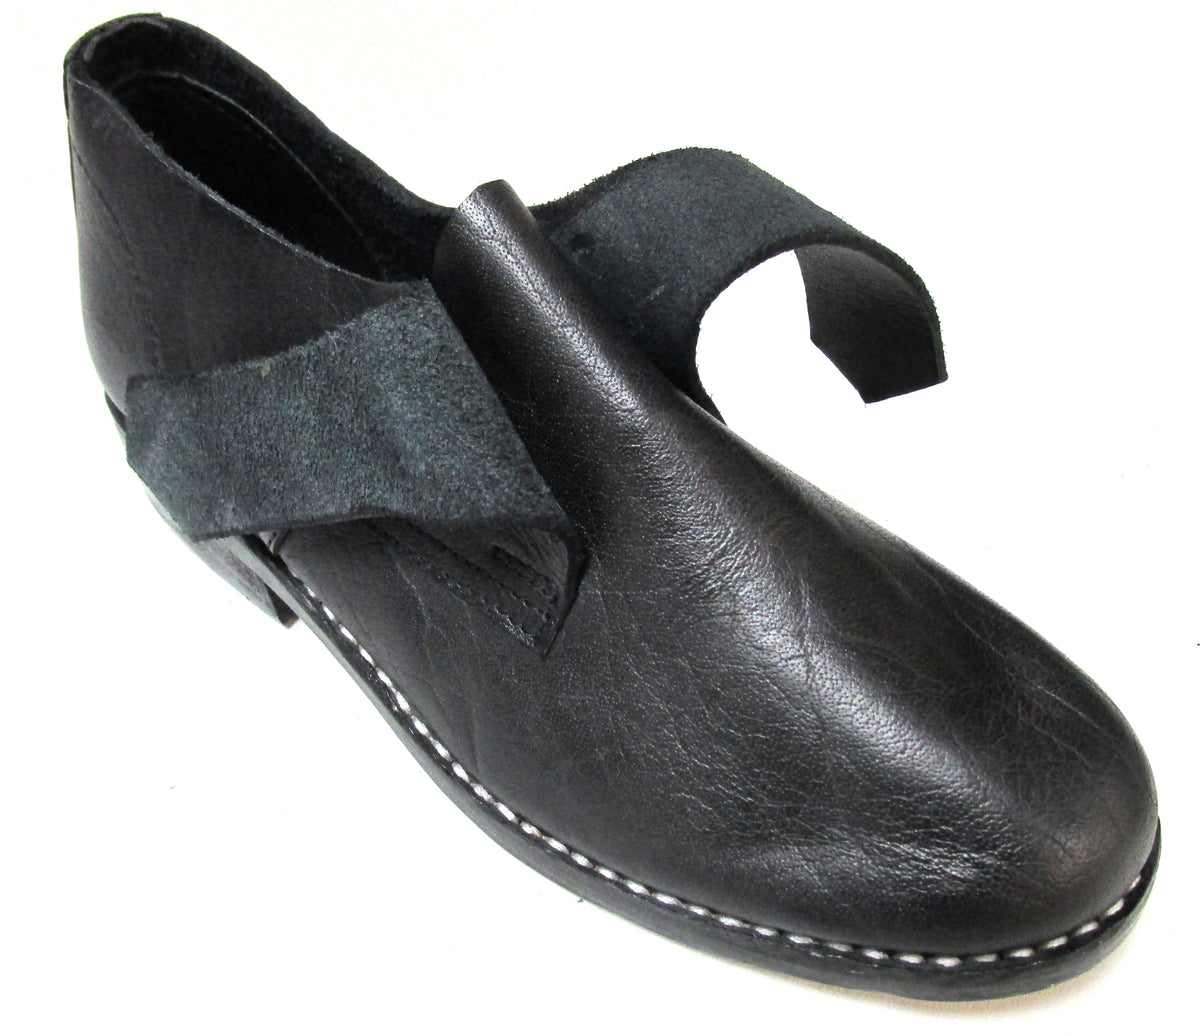 Reproduction Leather Colonial Shoes with Buckles